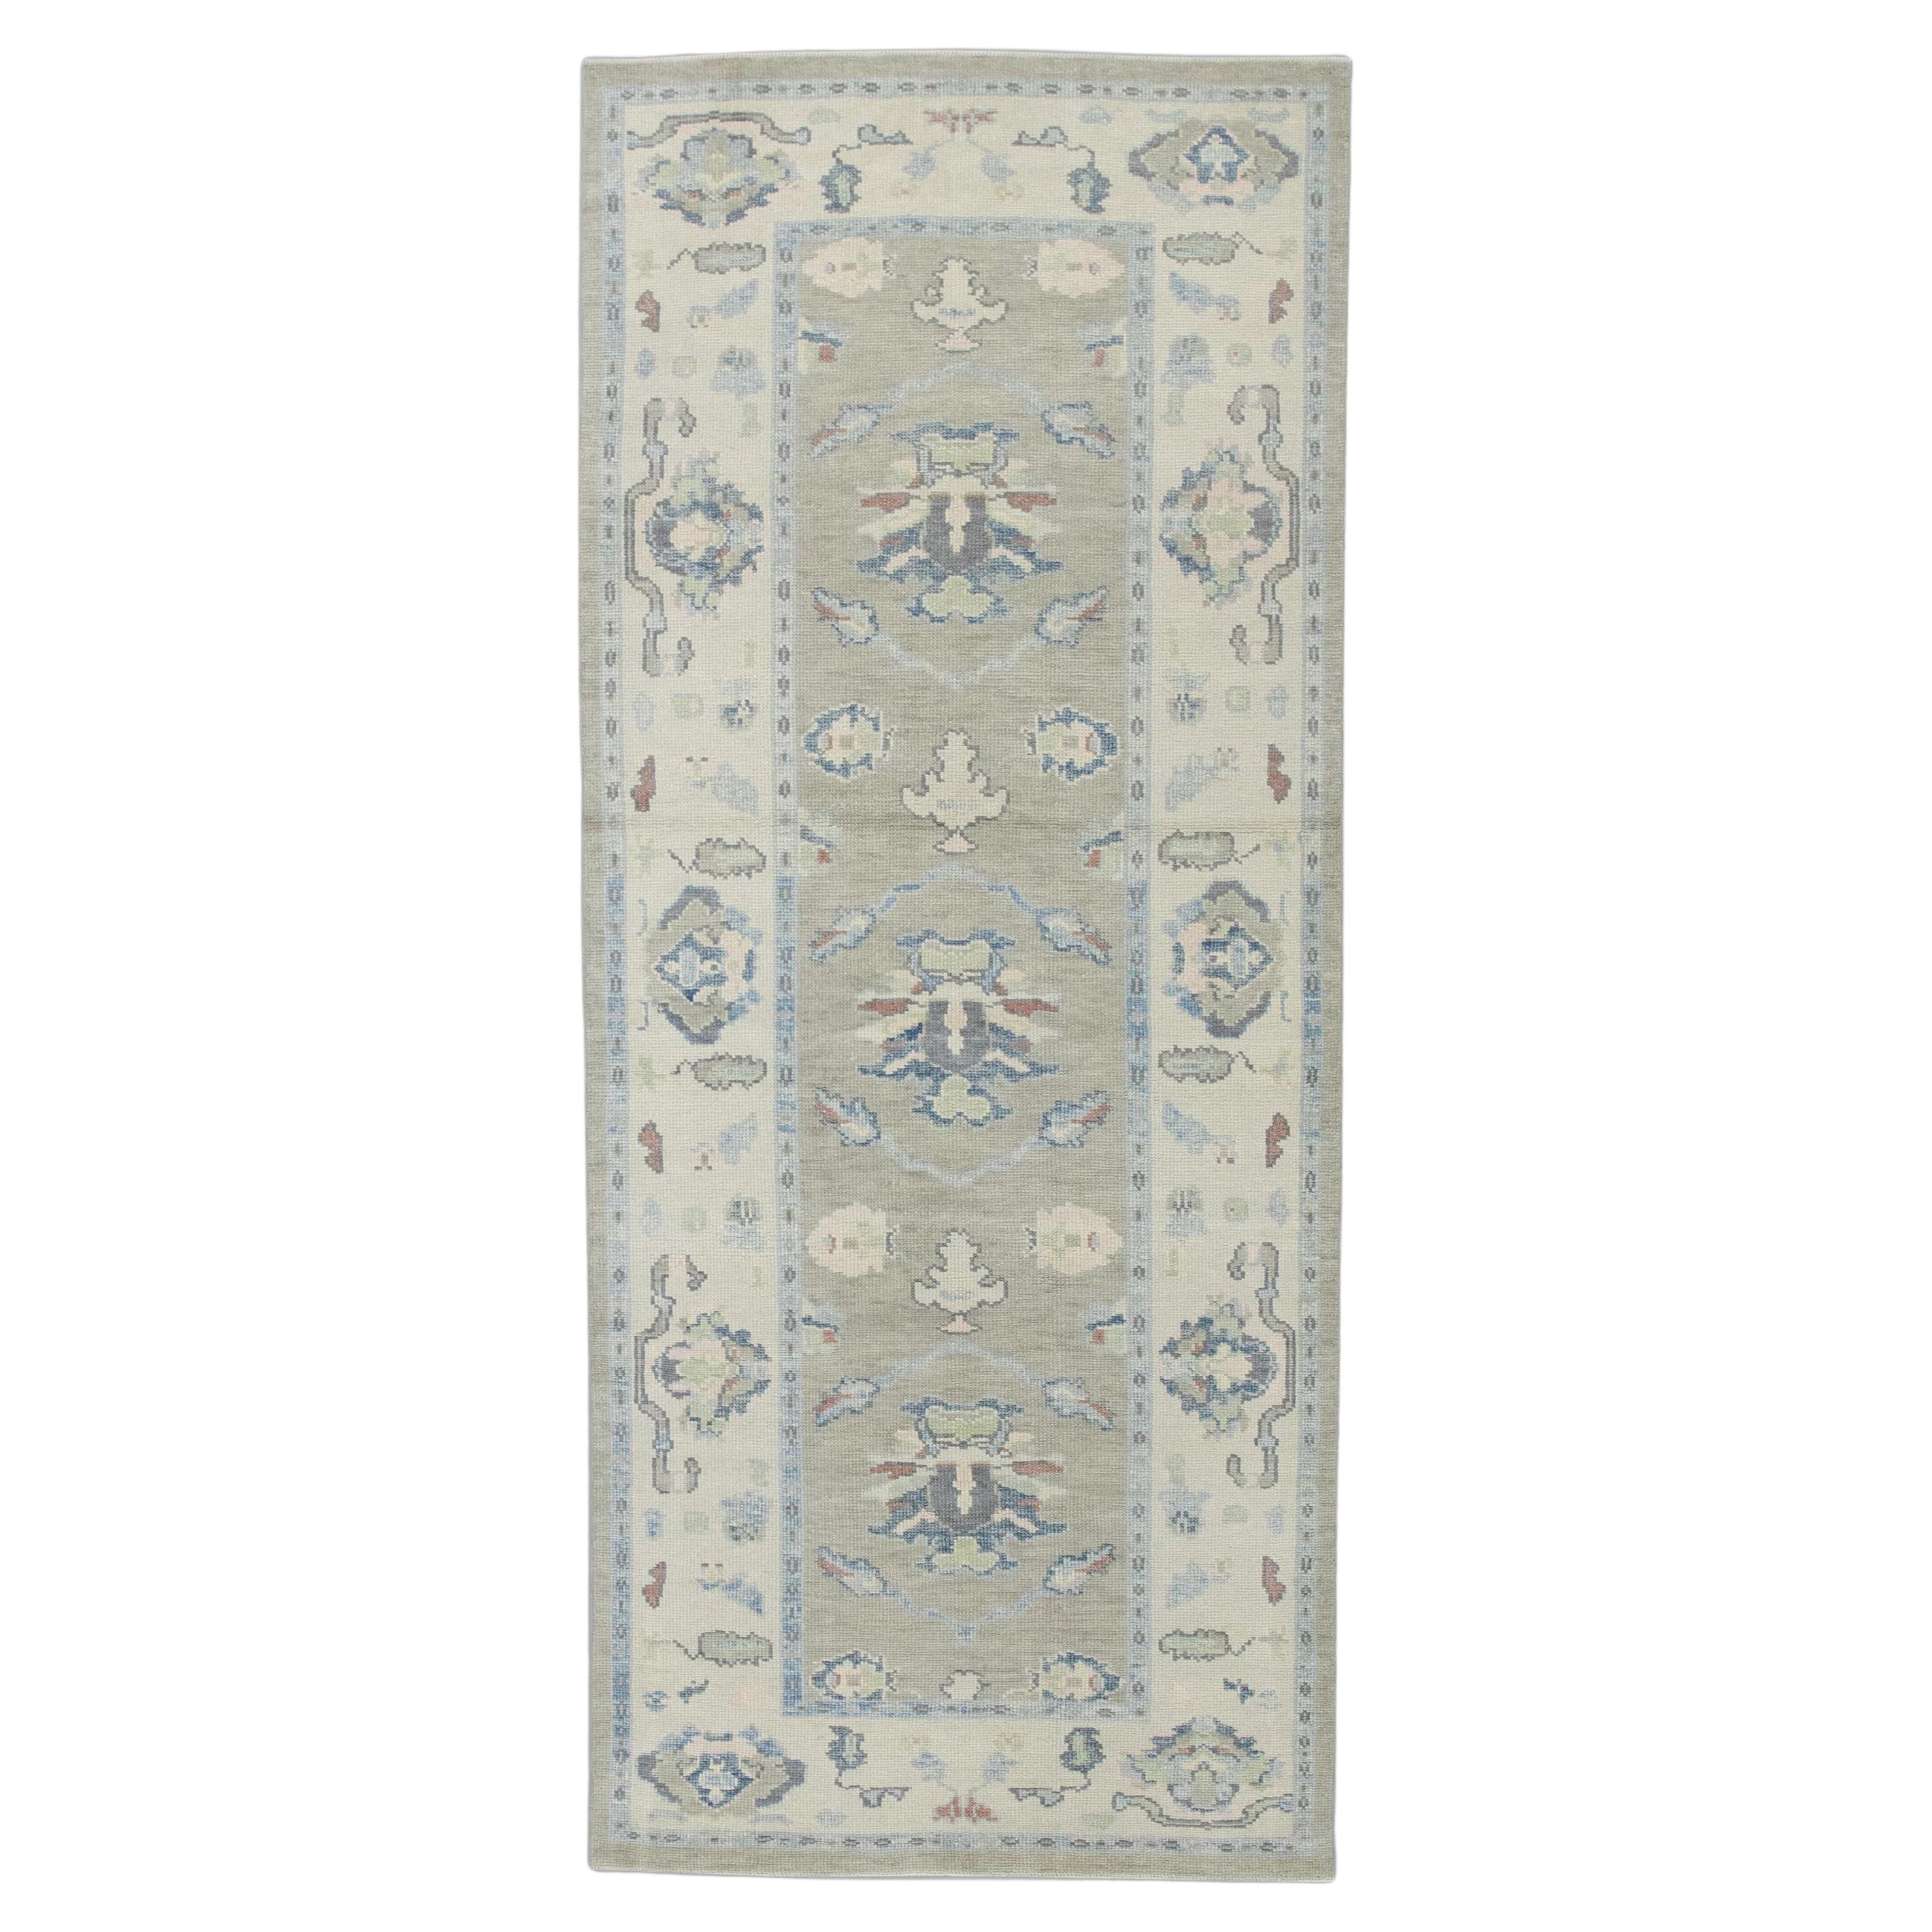 Green and Blue Floral Handwoven Wool Turkish Oushak Rug 4' x 9'10"